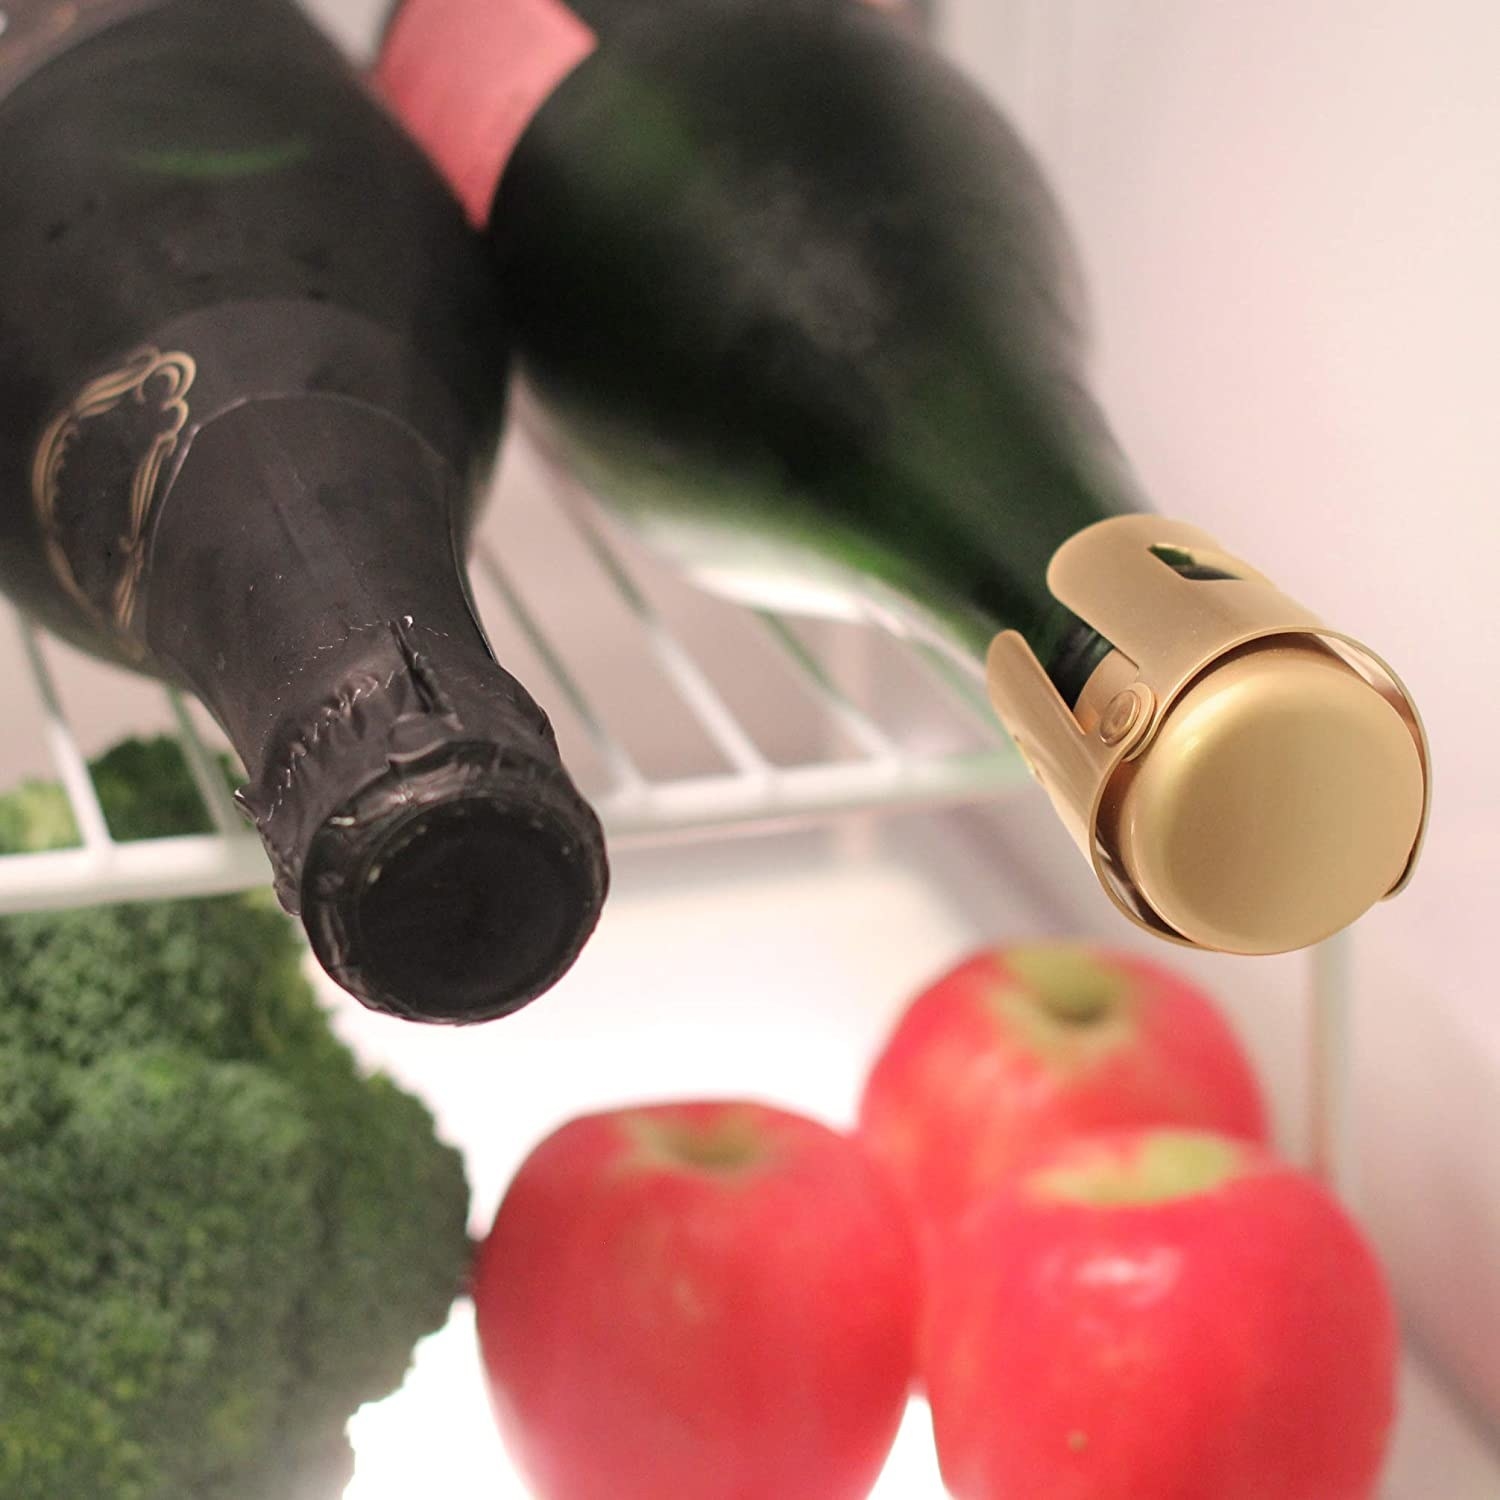 A bottle of champagne in a fridge with a resealed bottle